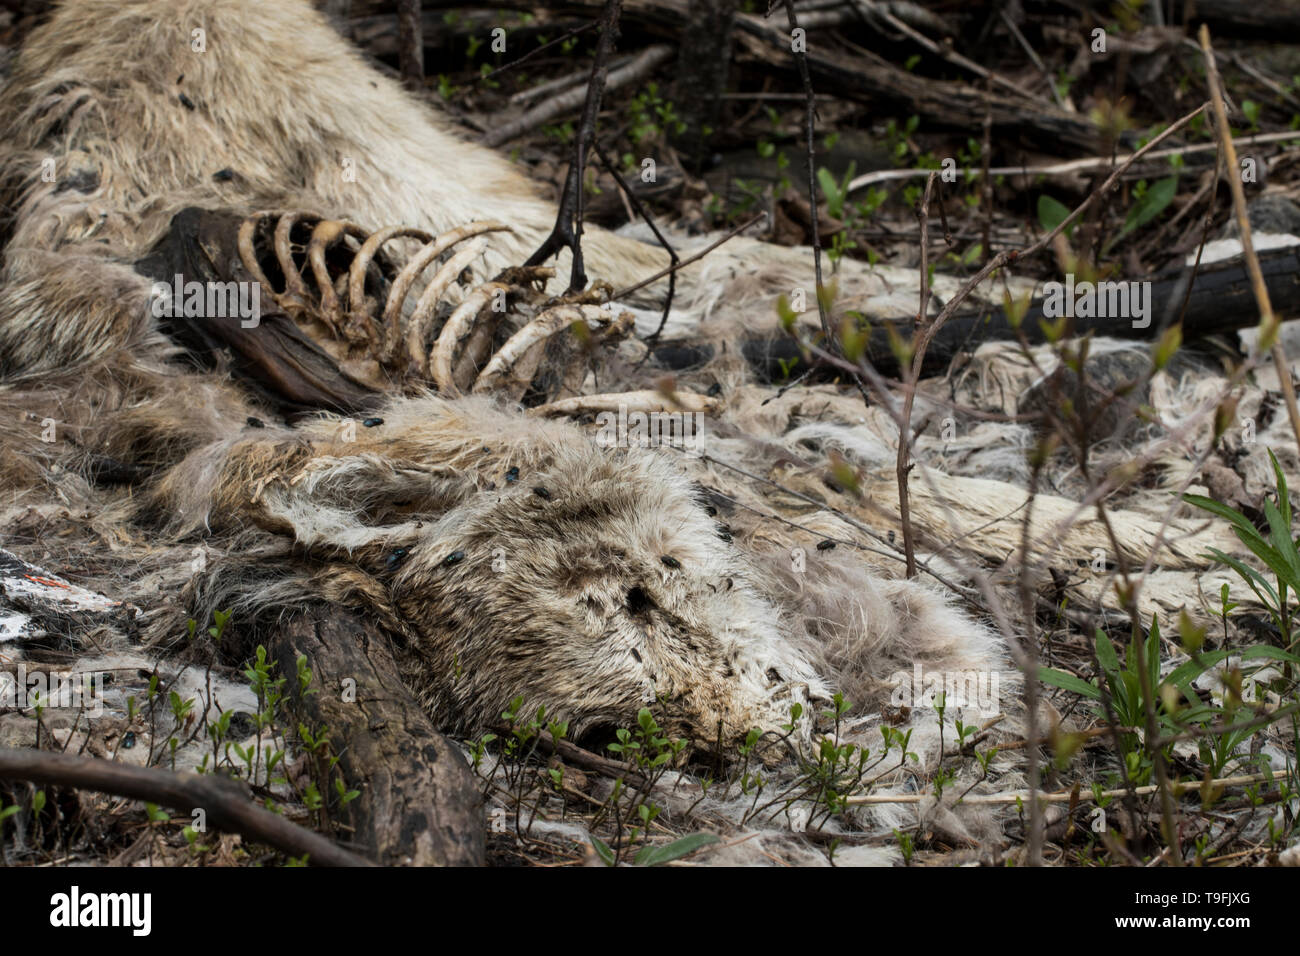 Death and decay concept. Cycle of life. Dead animal decomposing in the forest. Rotting animal skeleton. Stock Photo